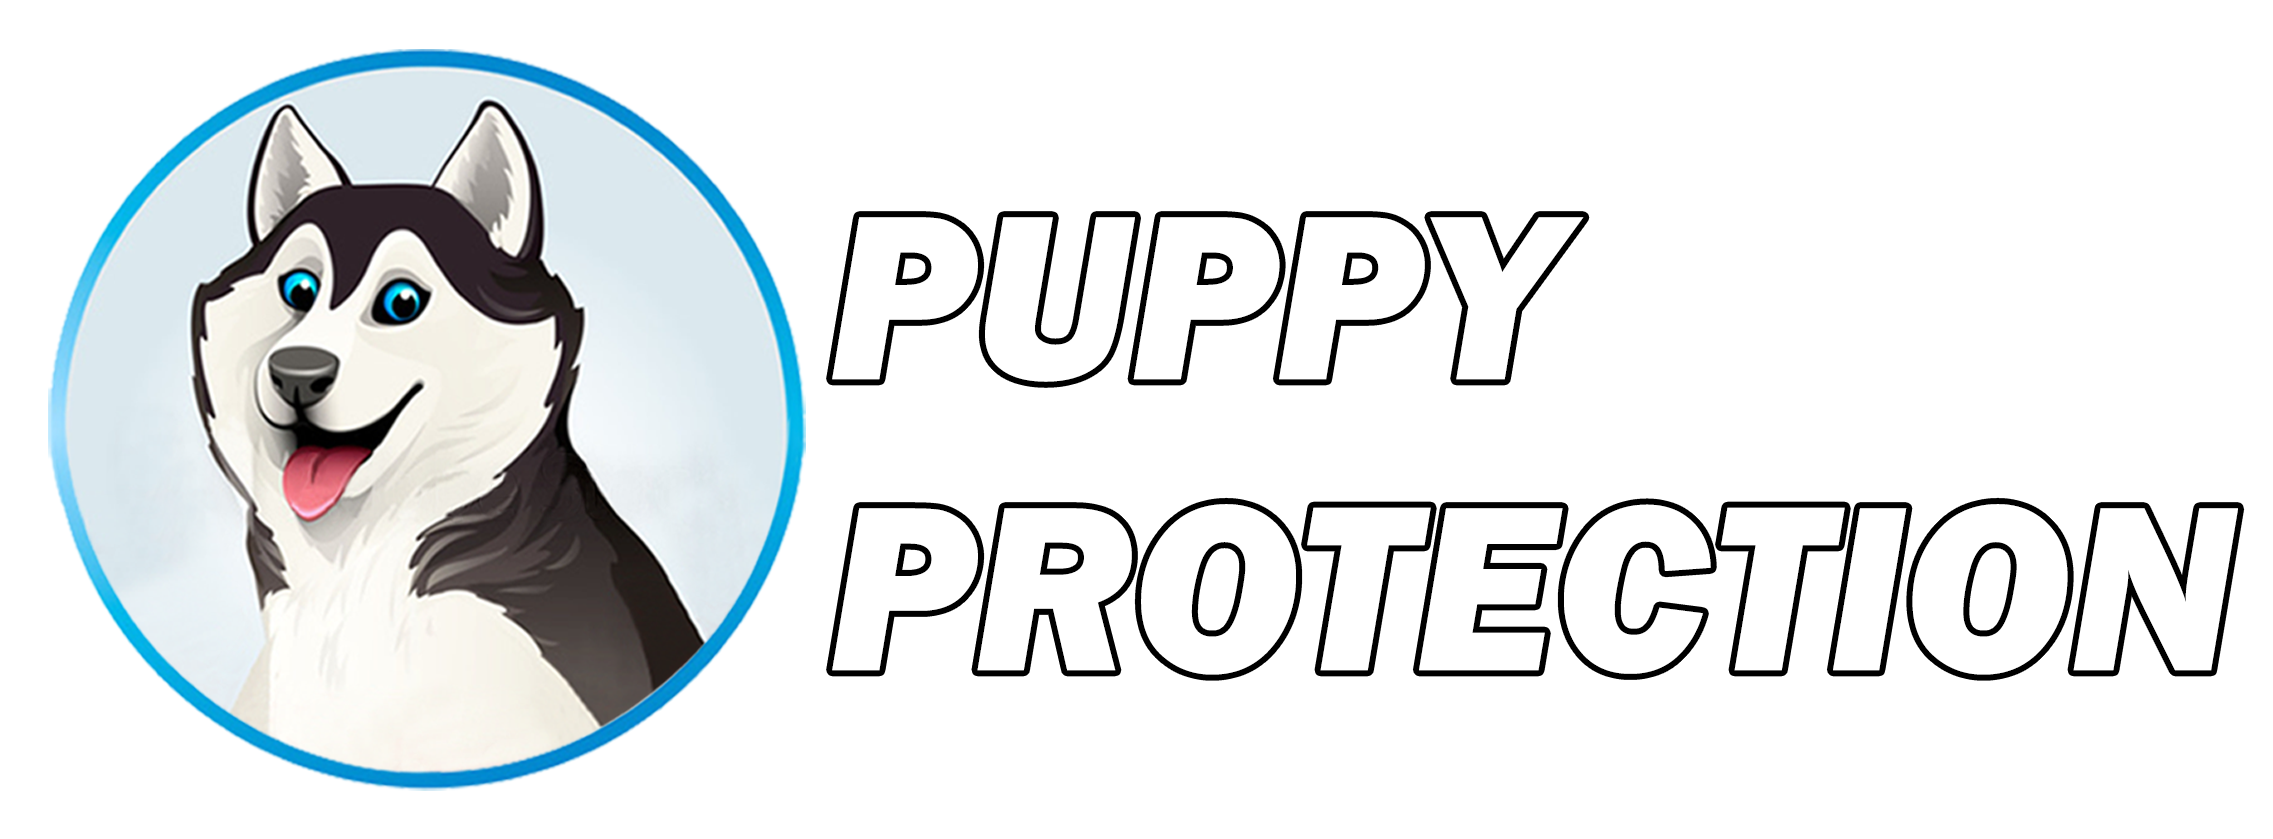 Puppy Protection